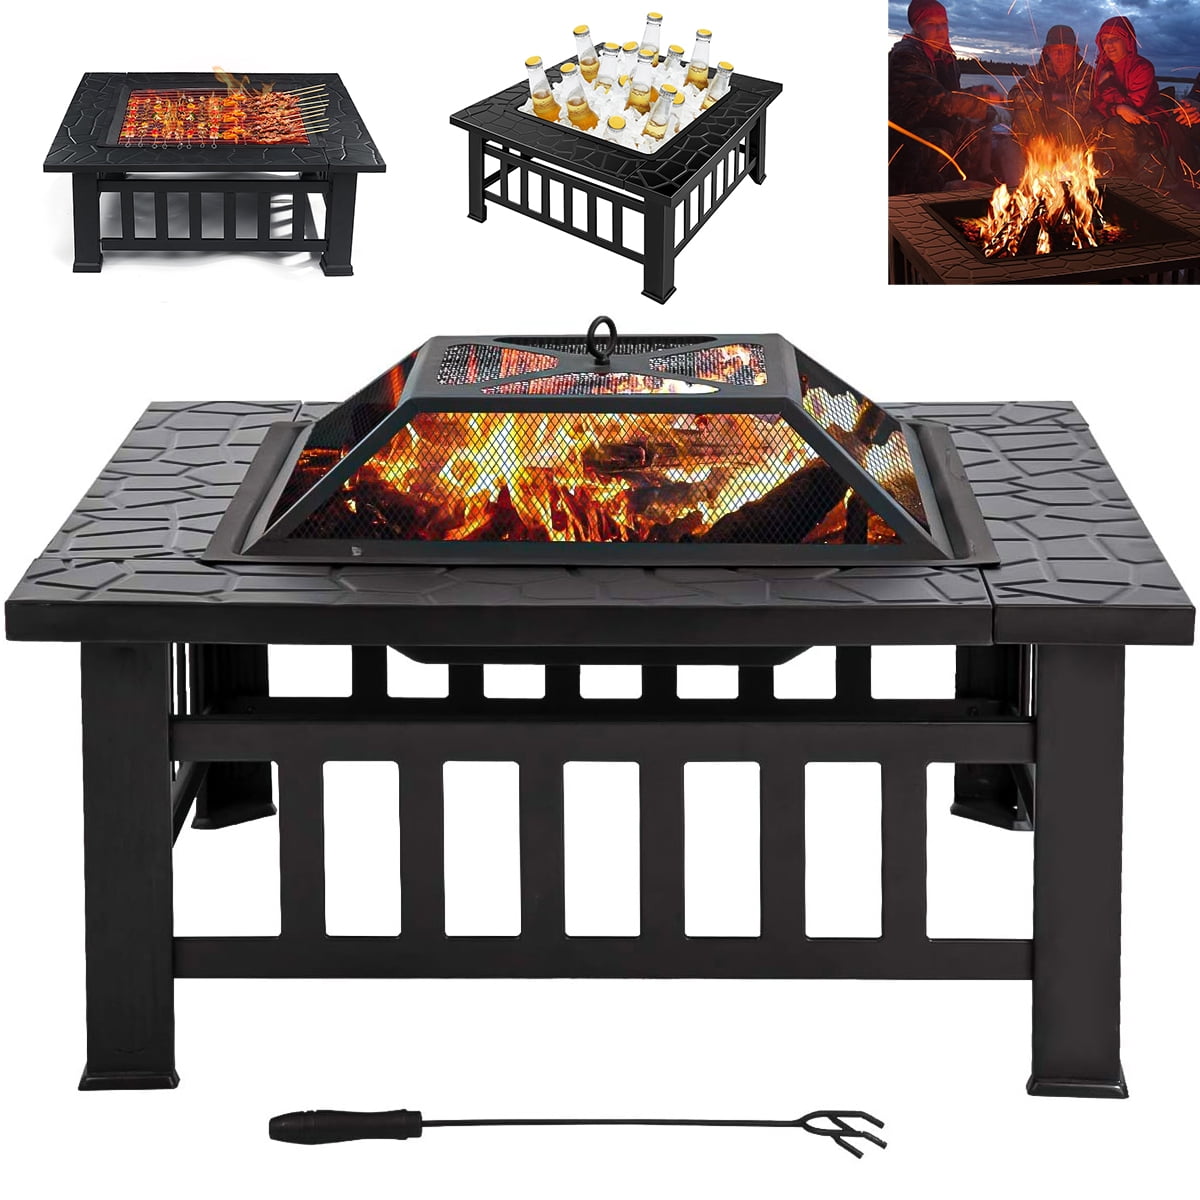 Details about   32'' Wood Burning Fire Pits Outdoor Heater Backyard Deck Patio BBQ Garden Stove 